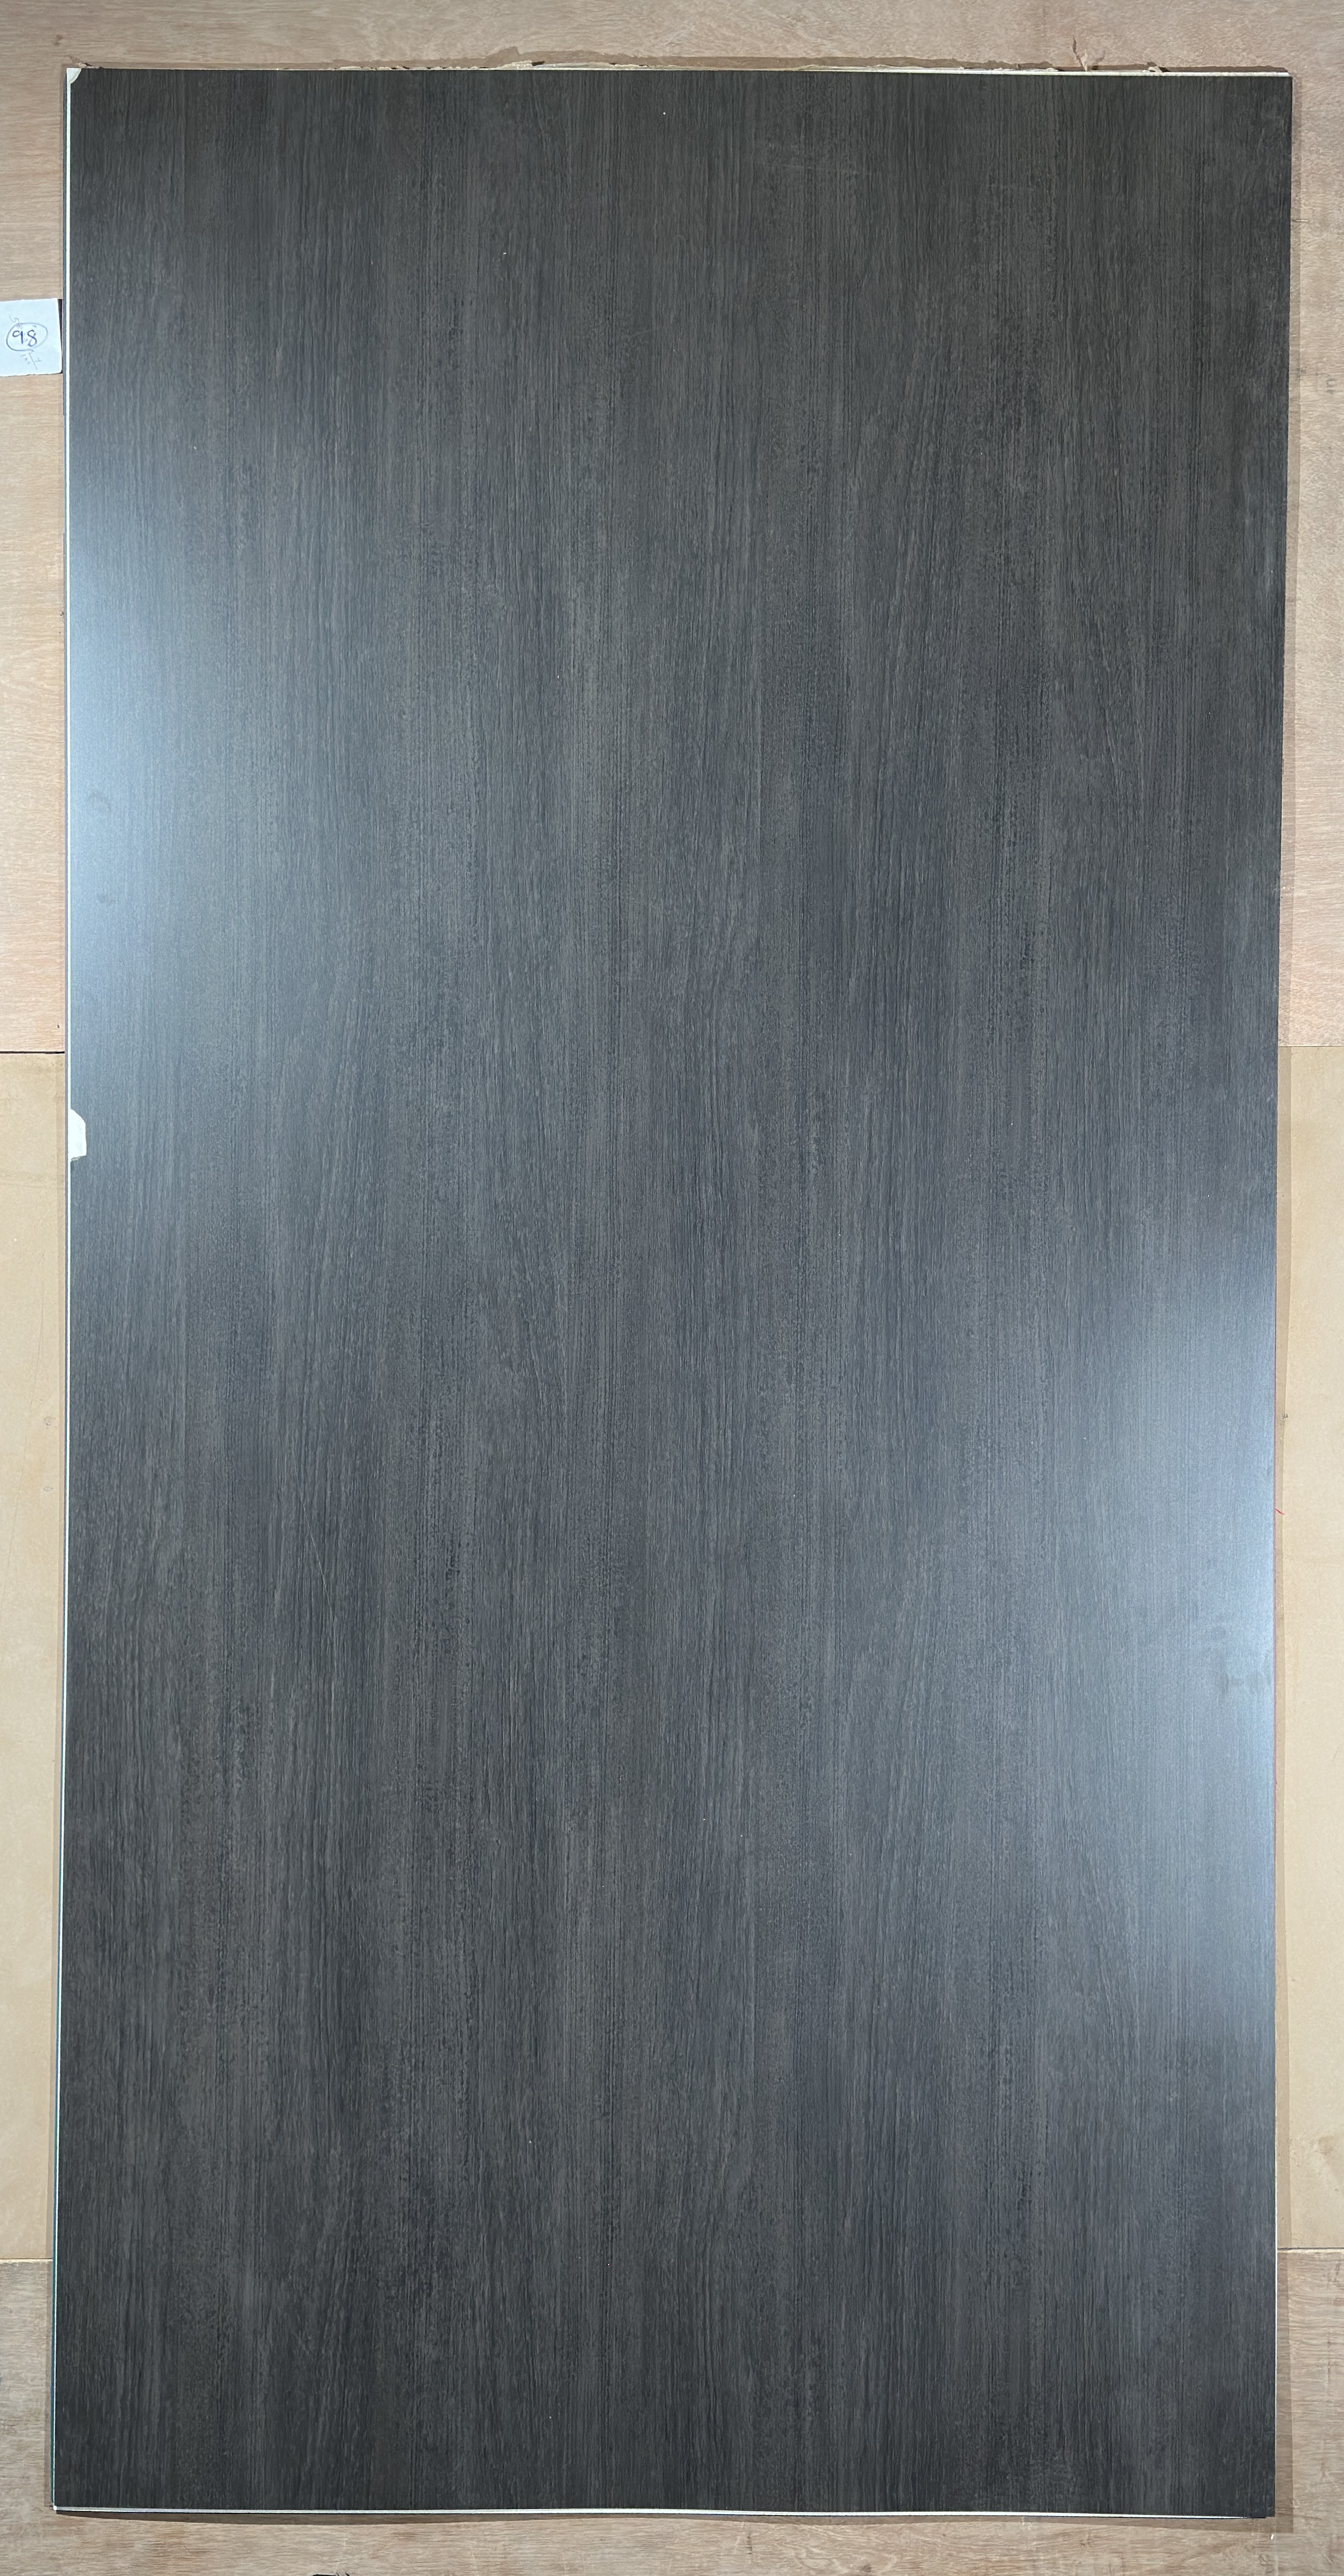 Material Depot laminates in bangalore - high quality image of a 87060 SF Black Decorative Laminate from Pulp Decor with Suede finish